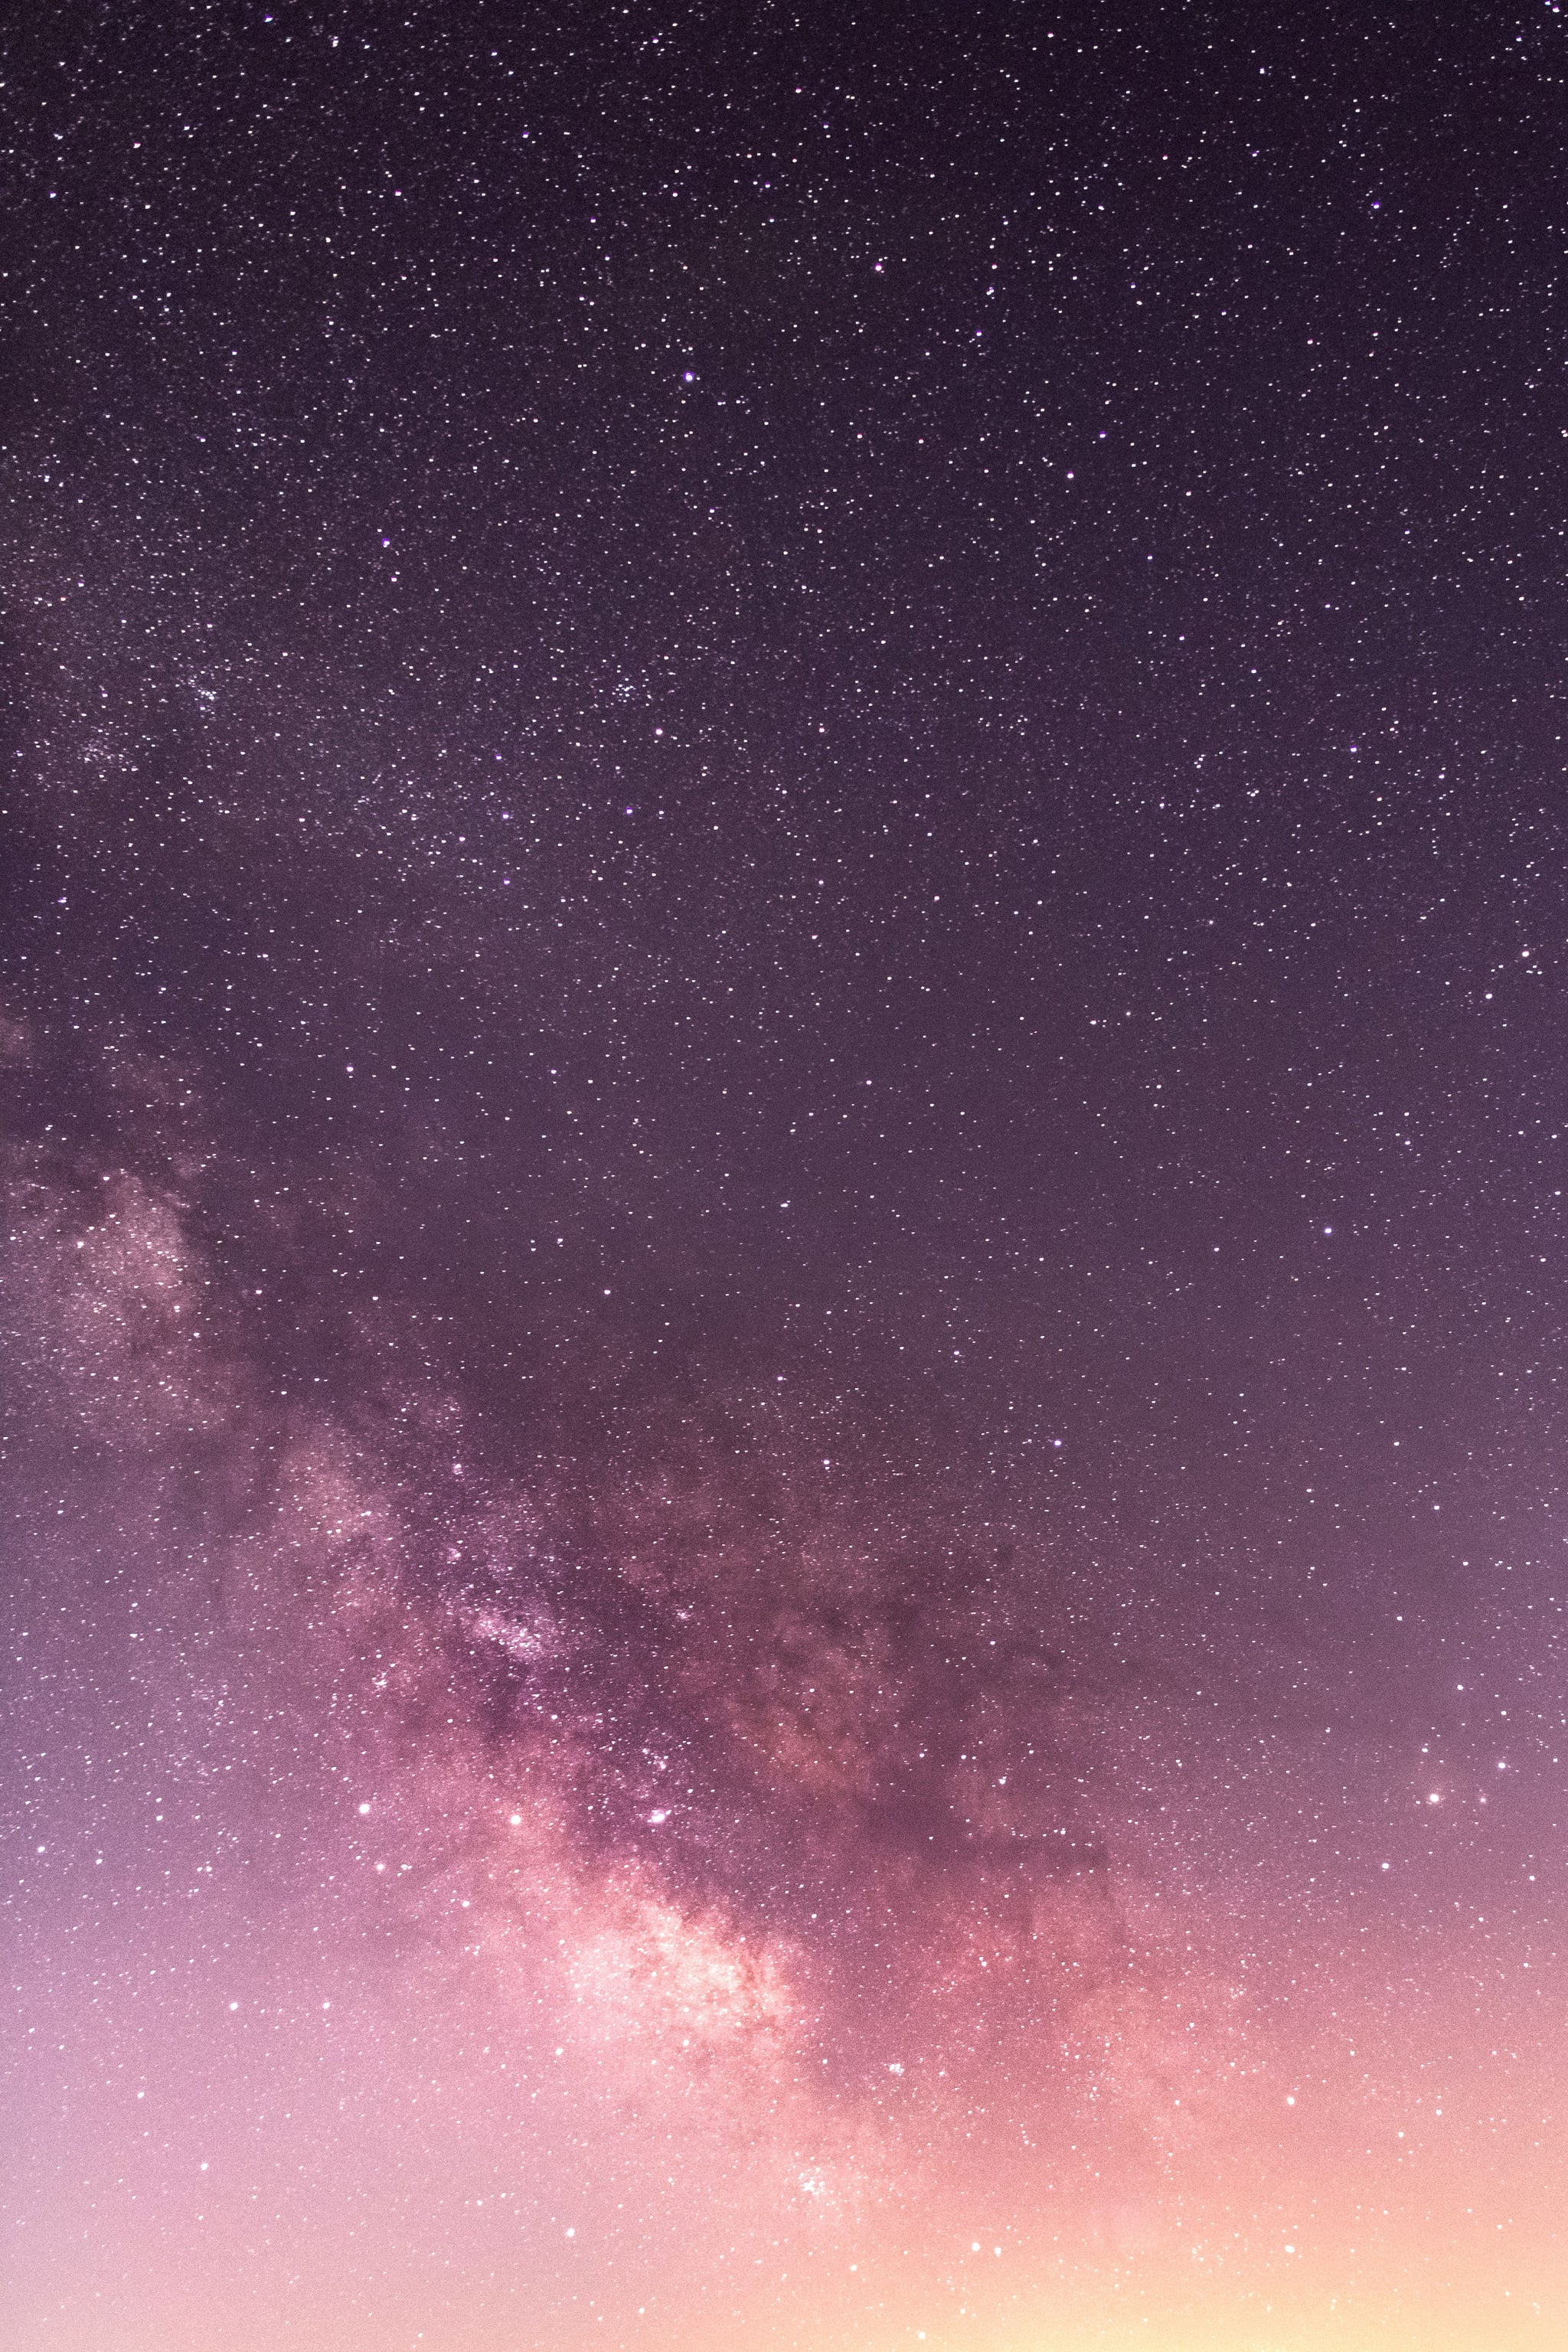 Night Sky Iphone Wallpaper The Best Ios 14 Wallpaper Ideas That Ll Make Your Phone Look Aesthetically Pleasing Af Popsugar Tech Photo 43